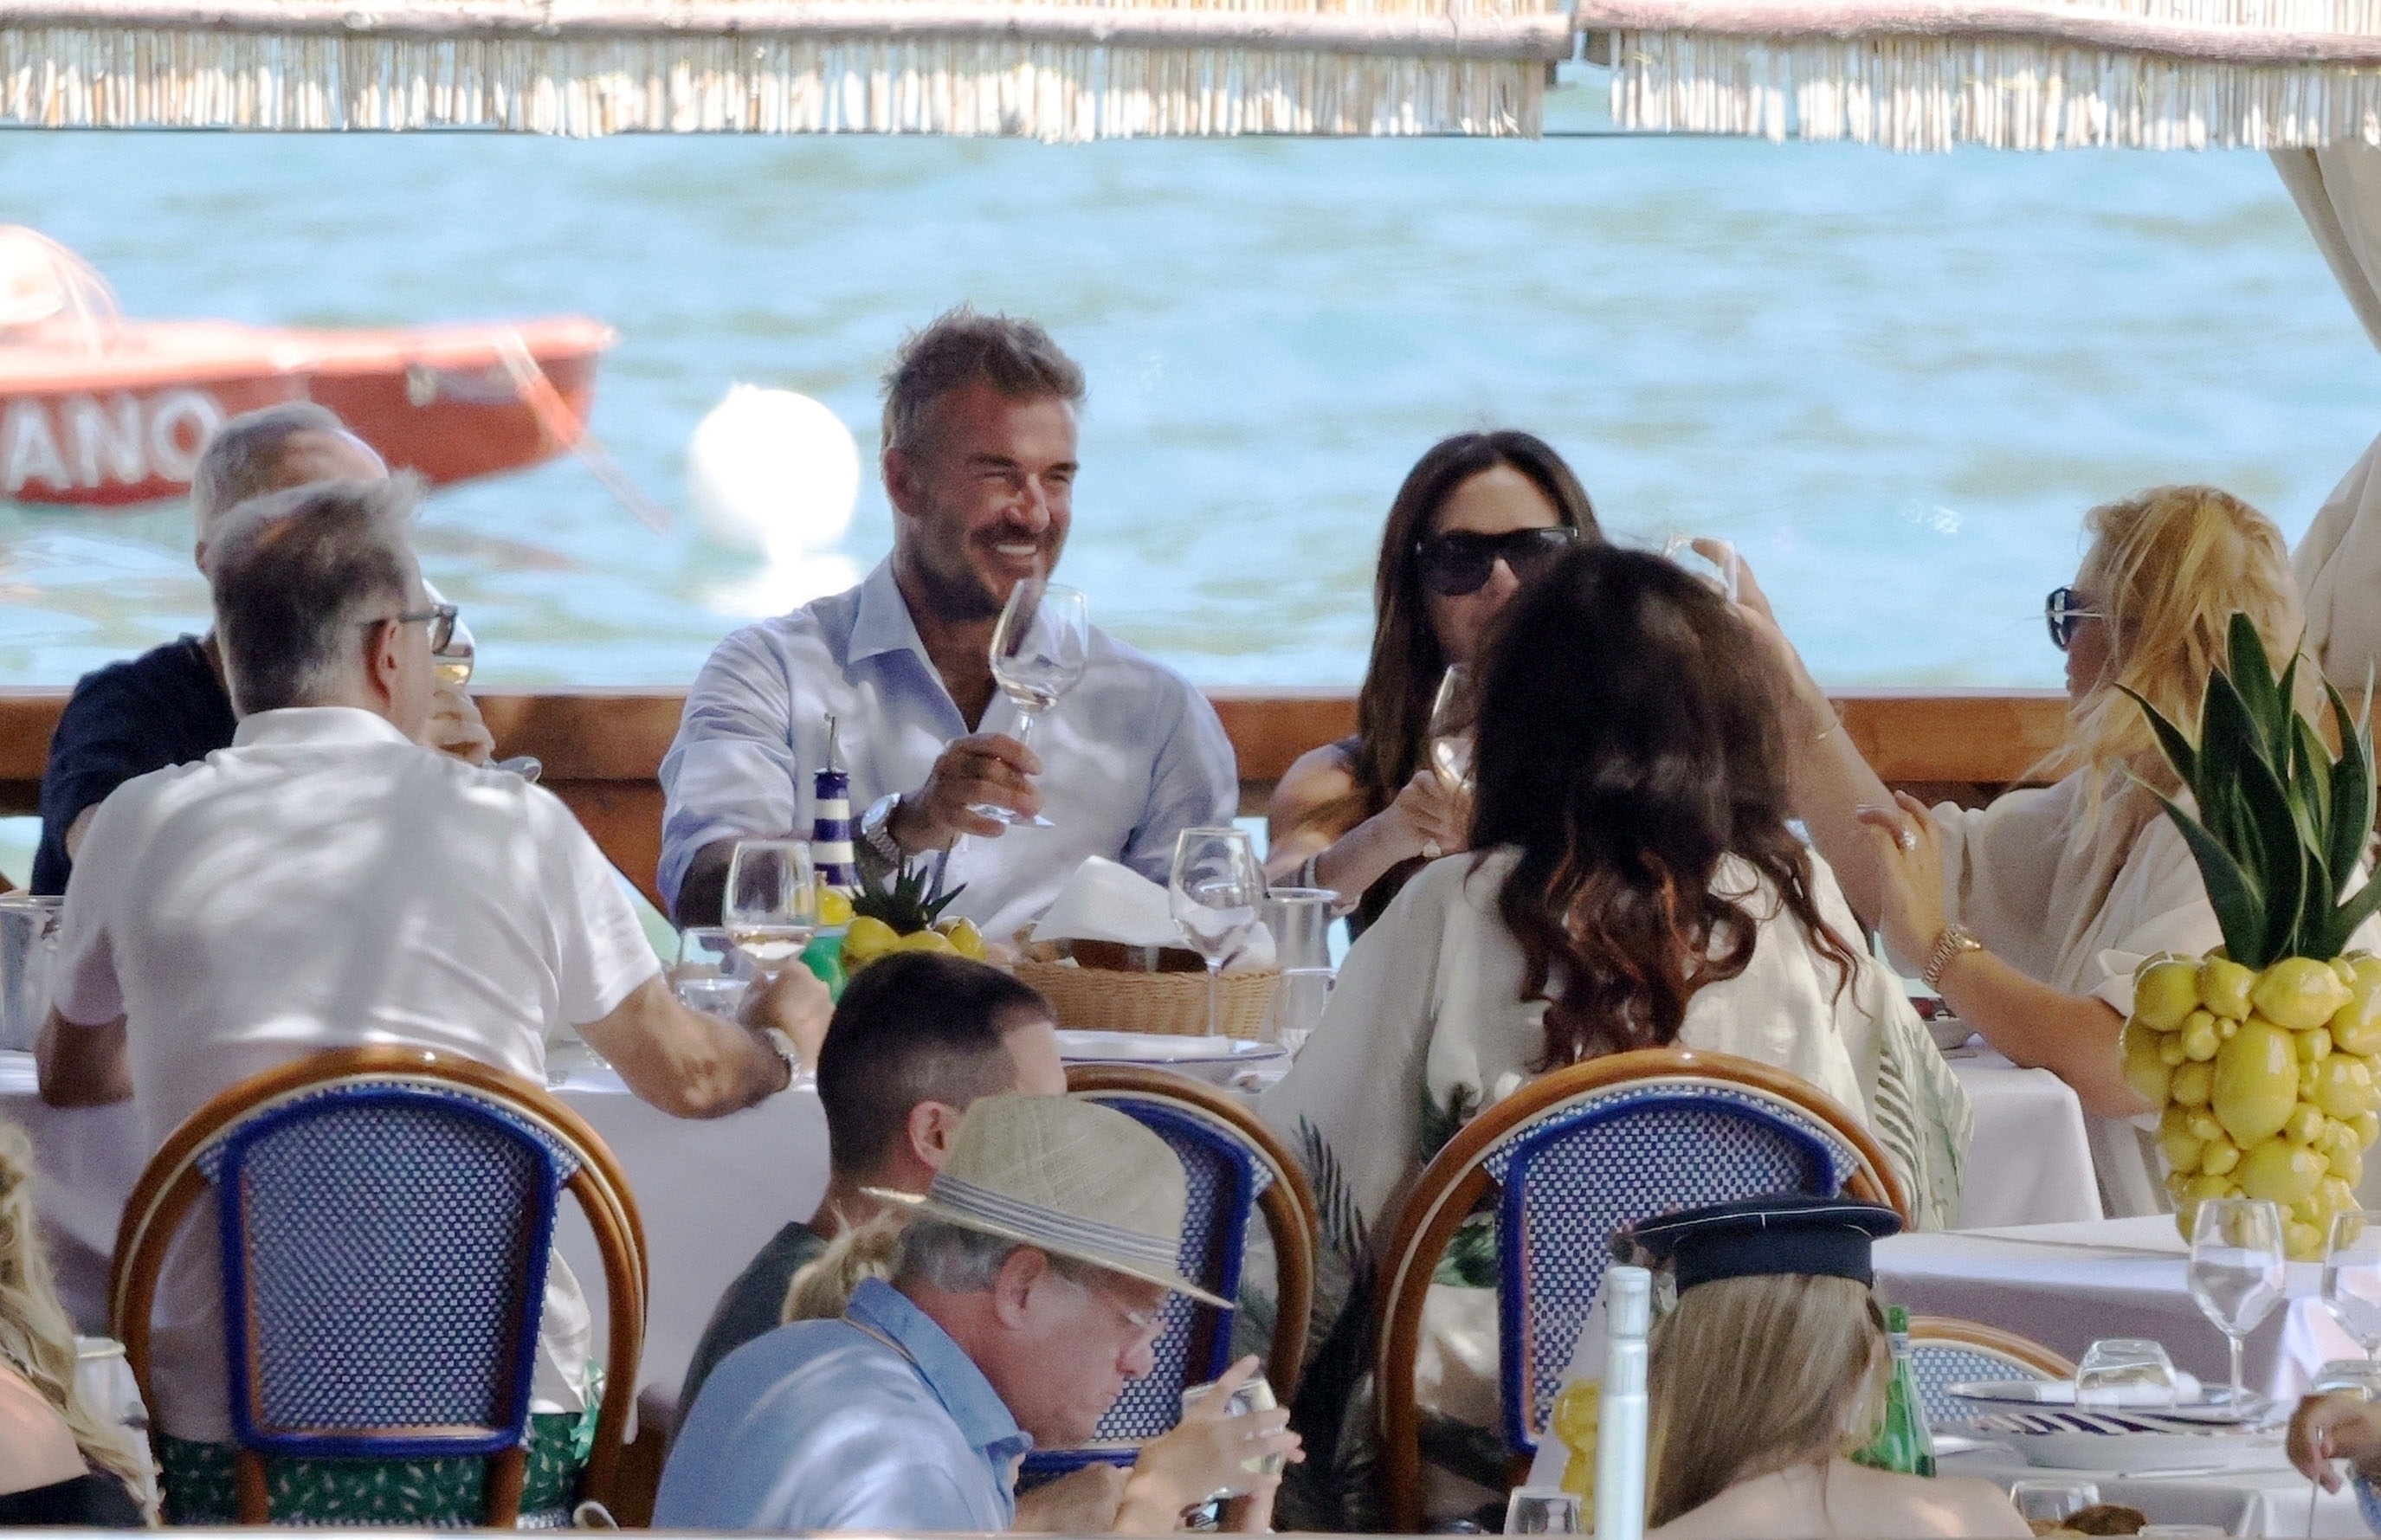 Becks and Posh Spice packed on the PDA at the table before retreating back to their yacht